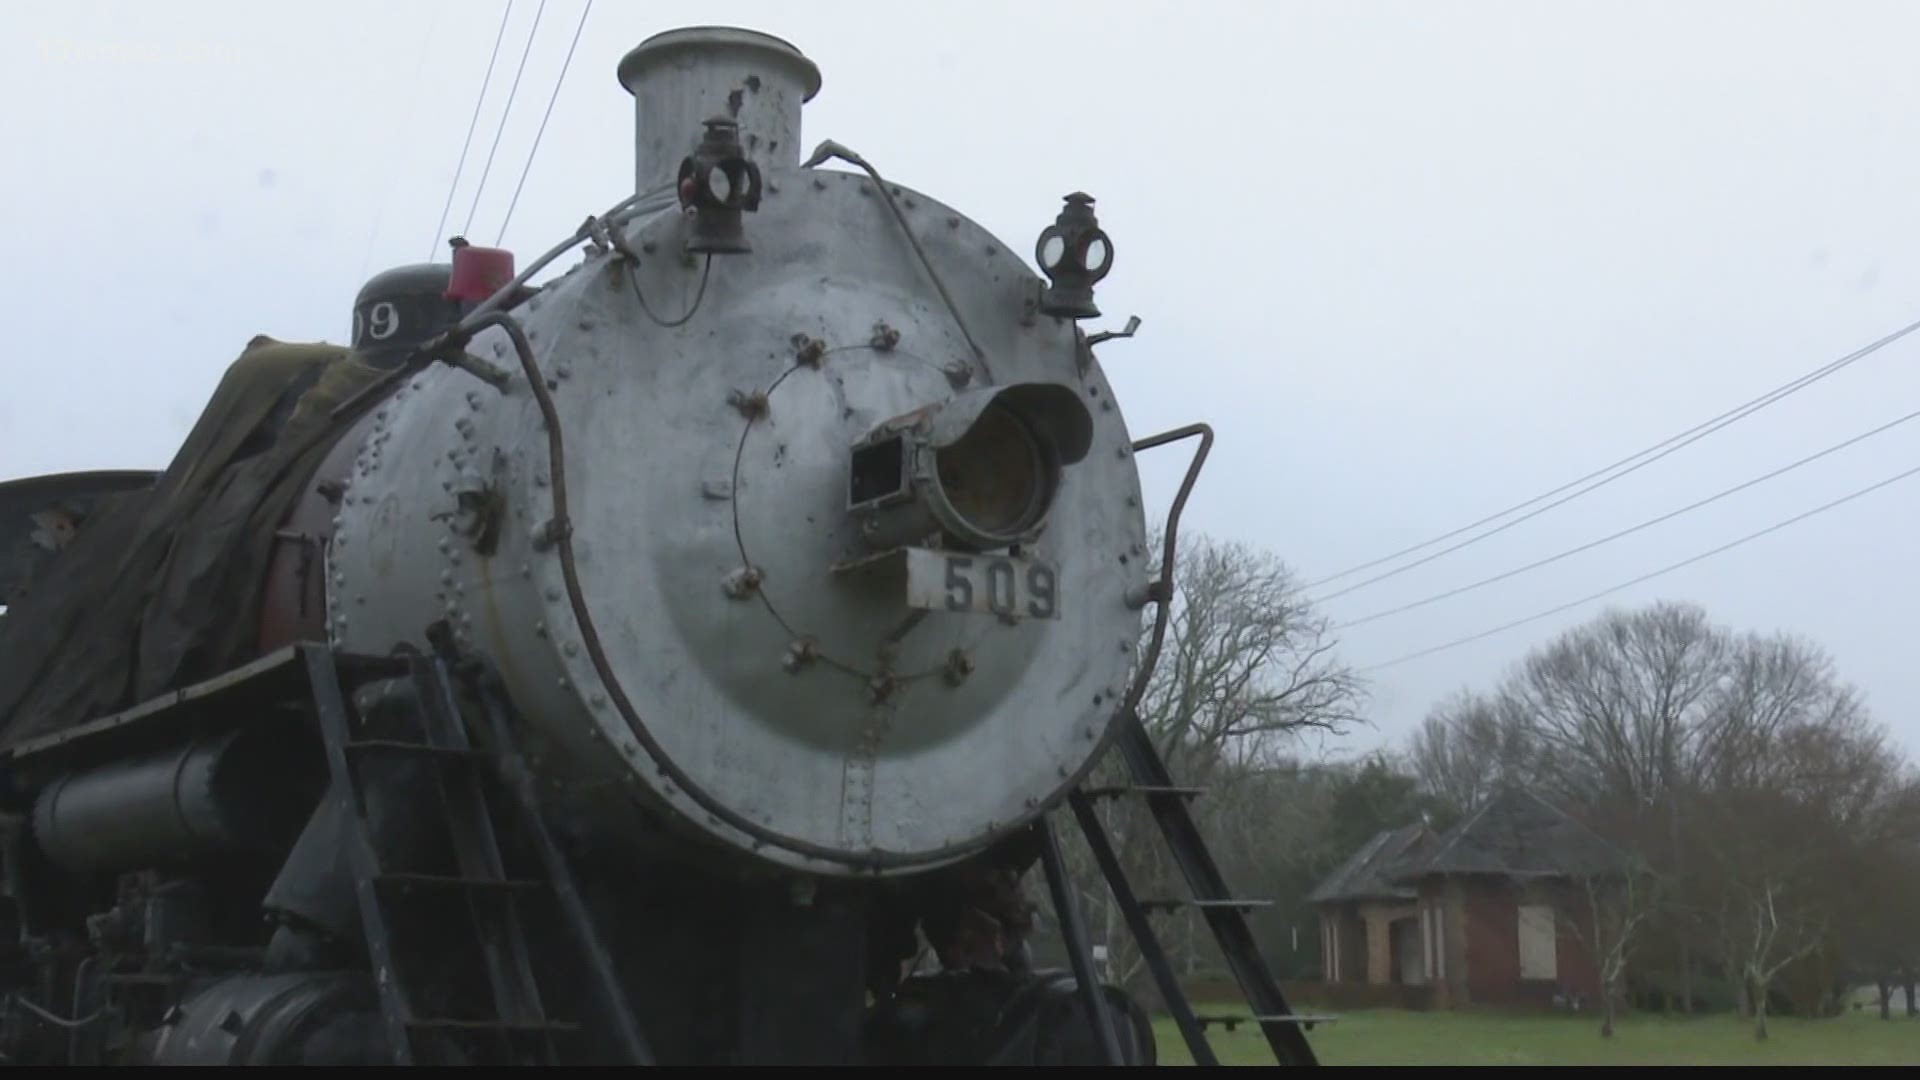 A steam locomotive near downtown Macon is one step closer to being fixed up, but the county needs more money to fully restore it.